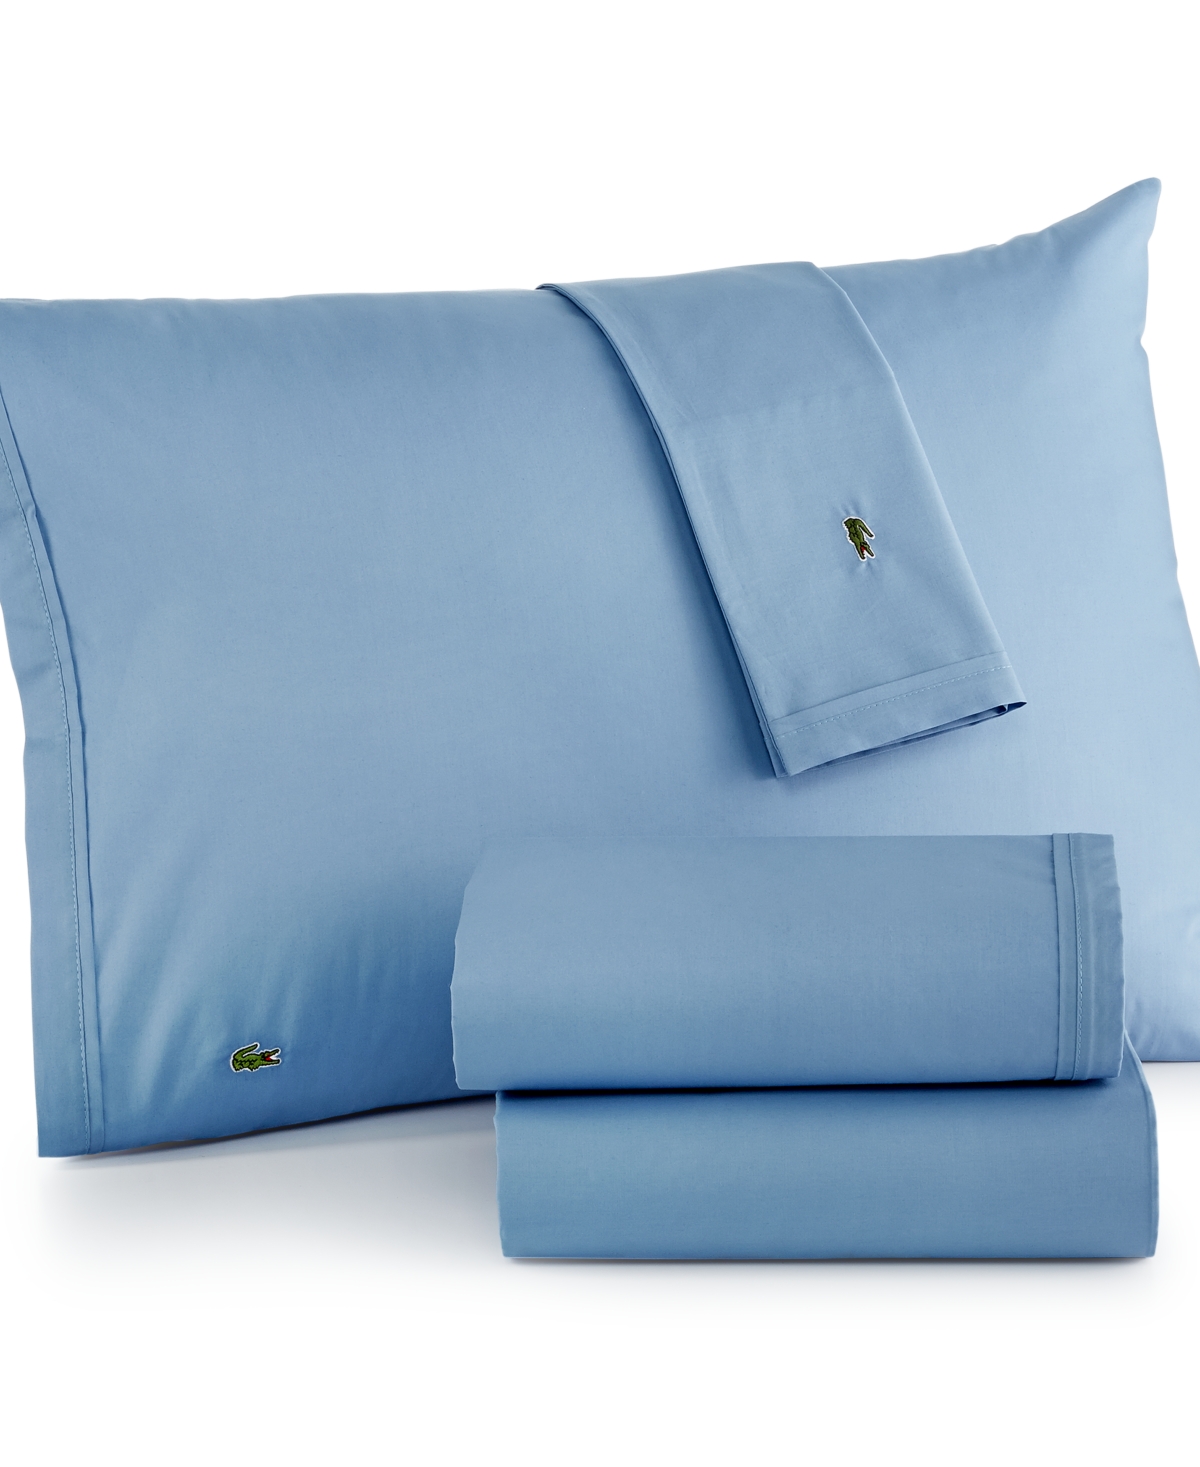 Lacoste Home Solid Cotton Percale Sheet Set, Full In Allure Blue